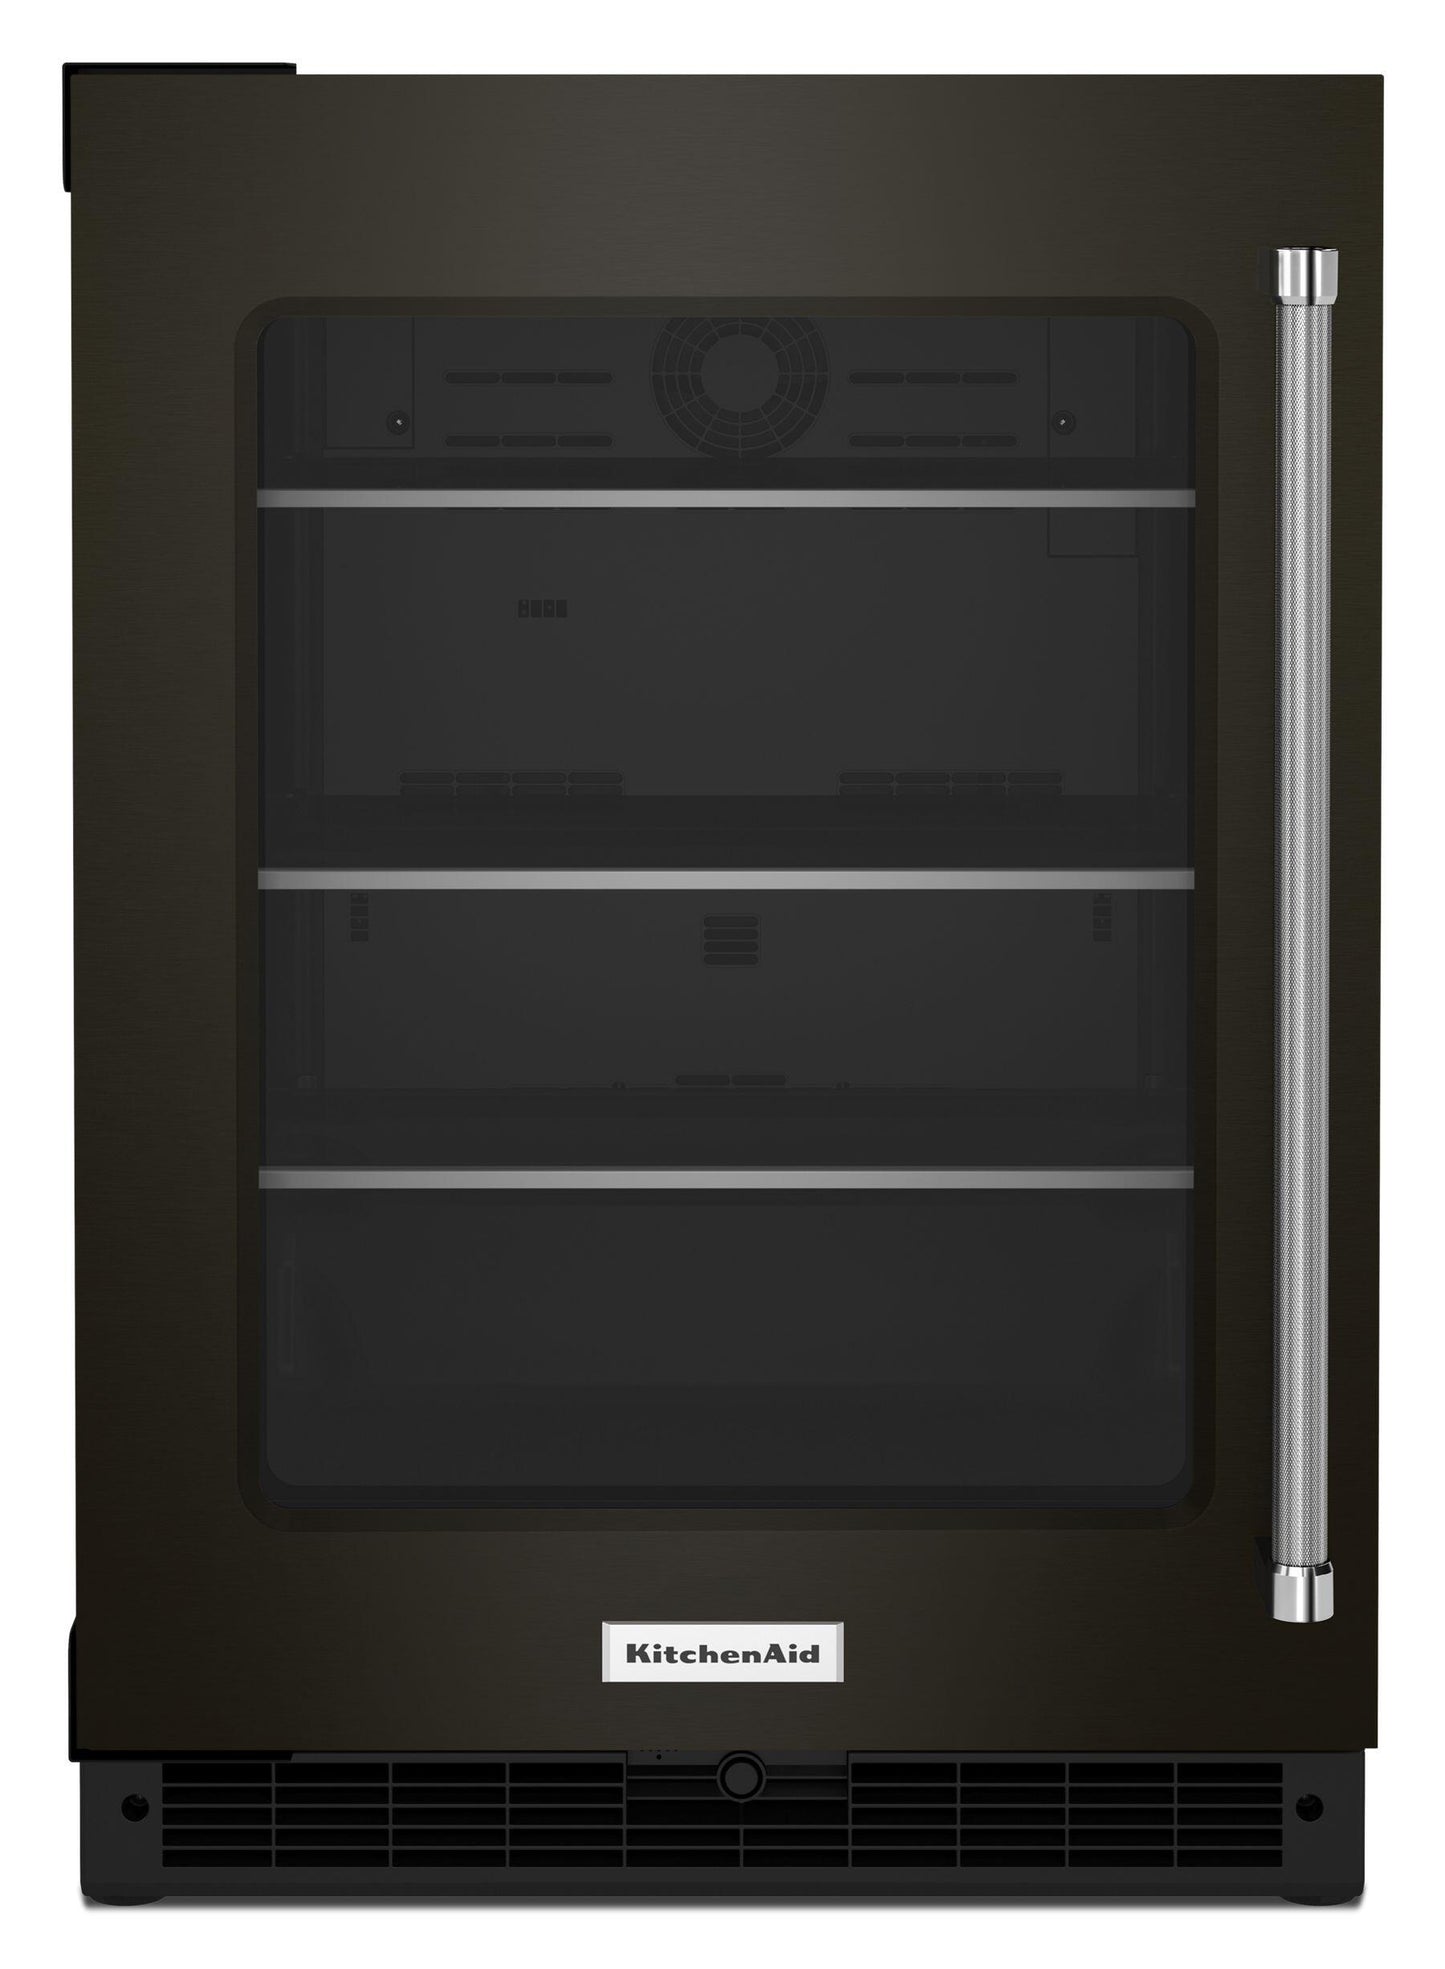 Kitchenaid KURL314KBS 24" Undercounter Refrigerator With Glass Door And Shelves With Metallic Accents - Black Stainless Steel With Printshield&#8482; Finish